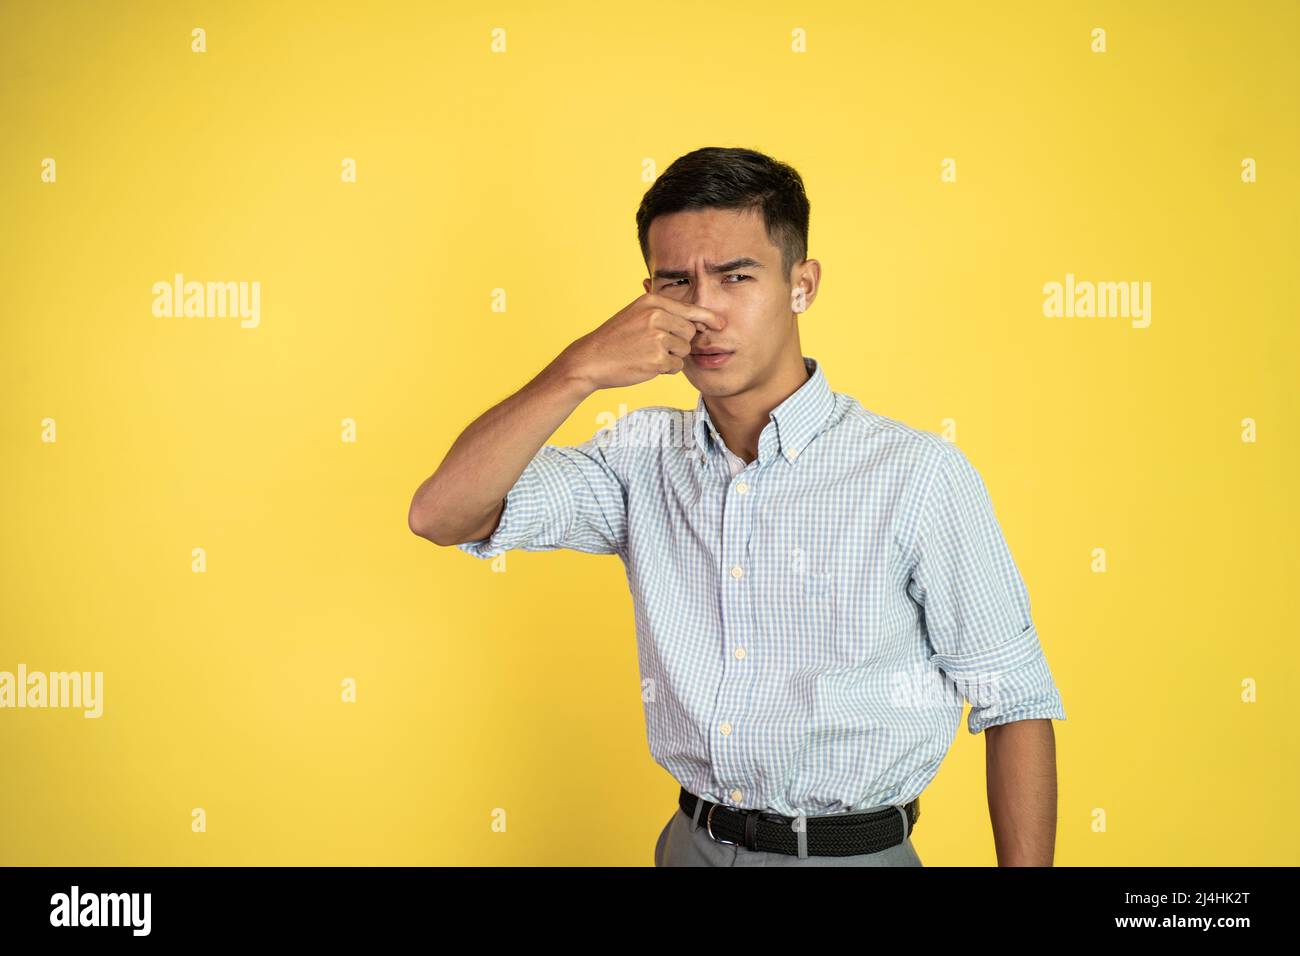 man cover his nose and feeling disgusted by the smell Stock Photo